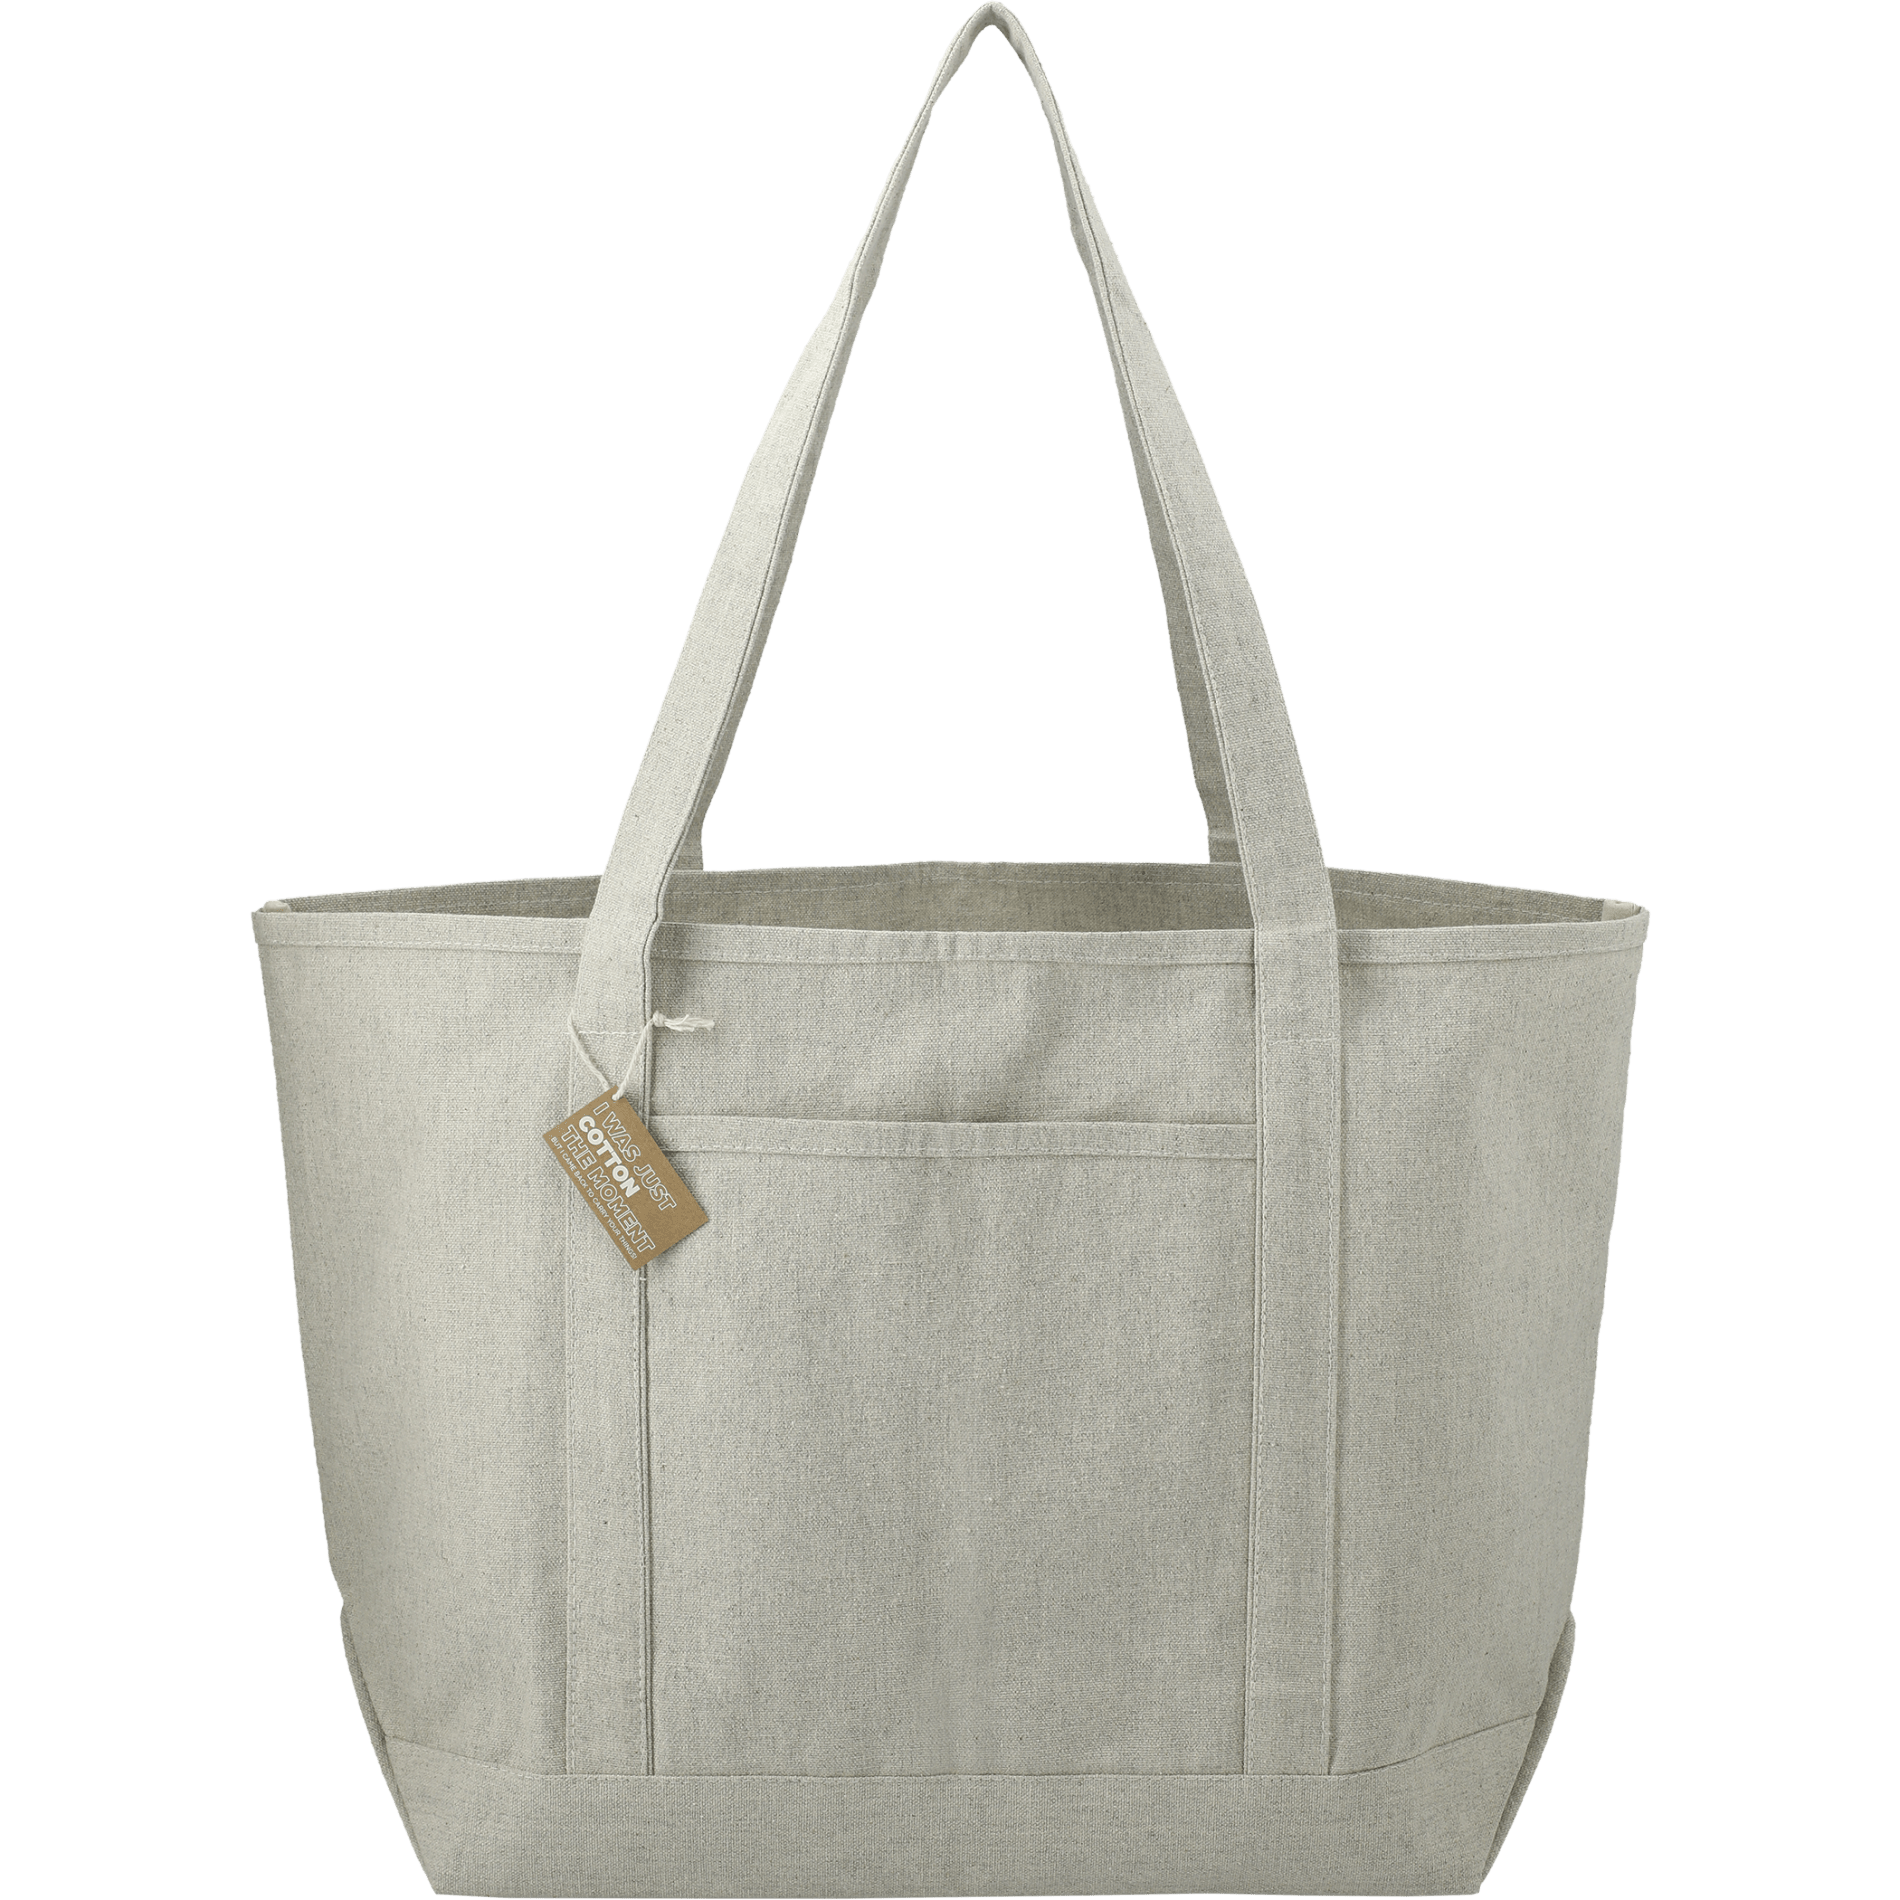 LEEDS 7901-13 - Repose 10oz Recycled Cotton Boat Tote